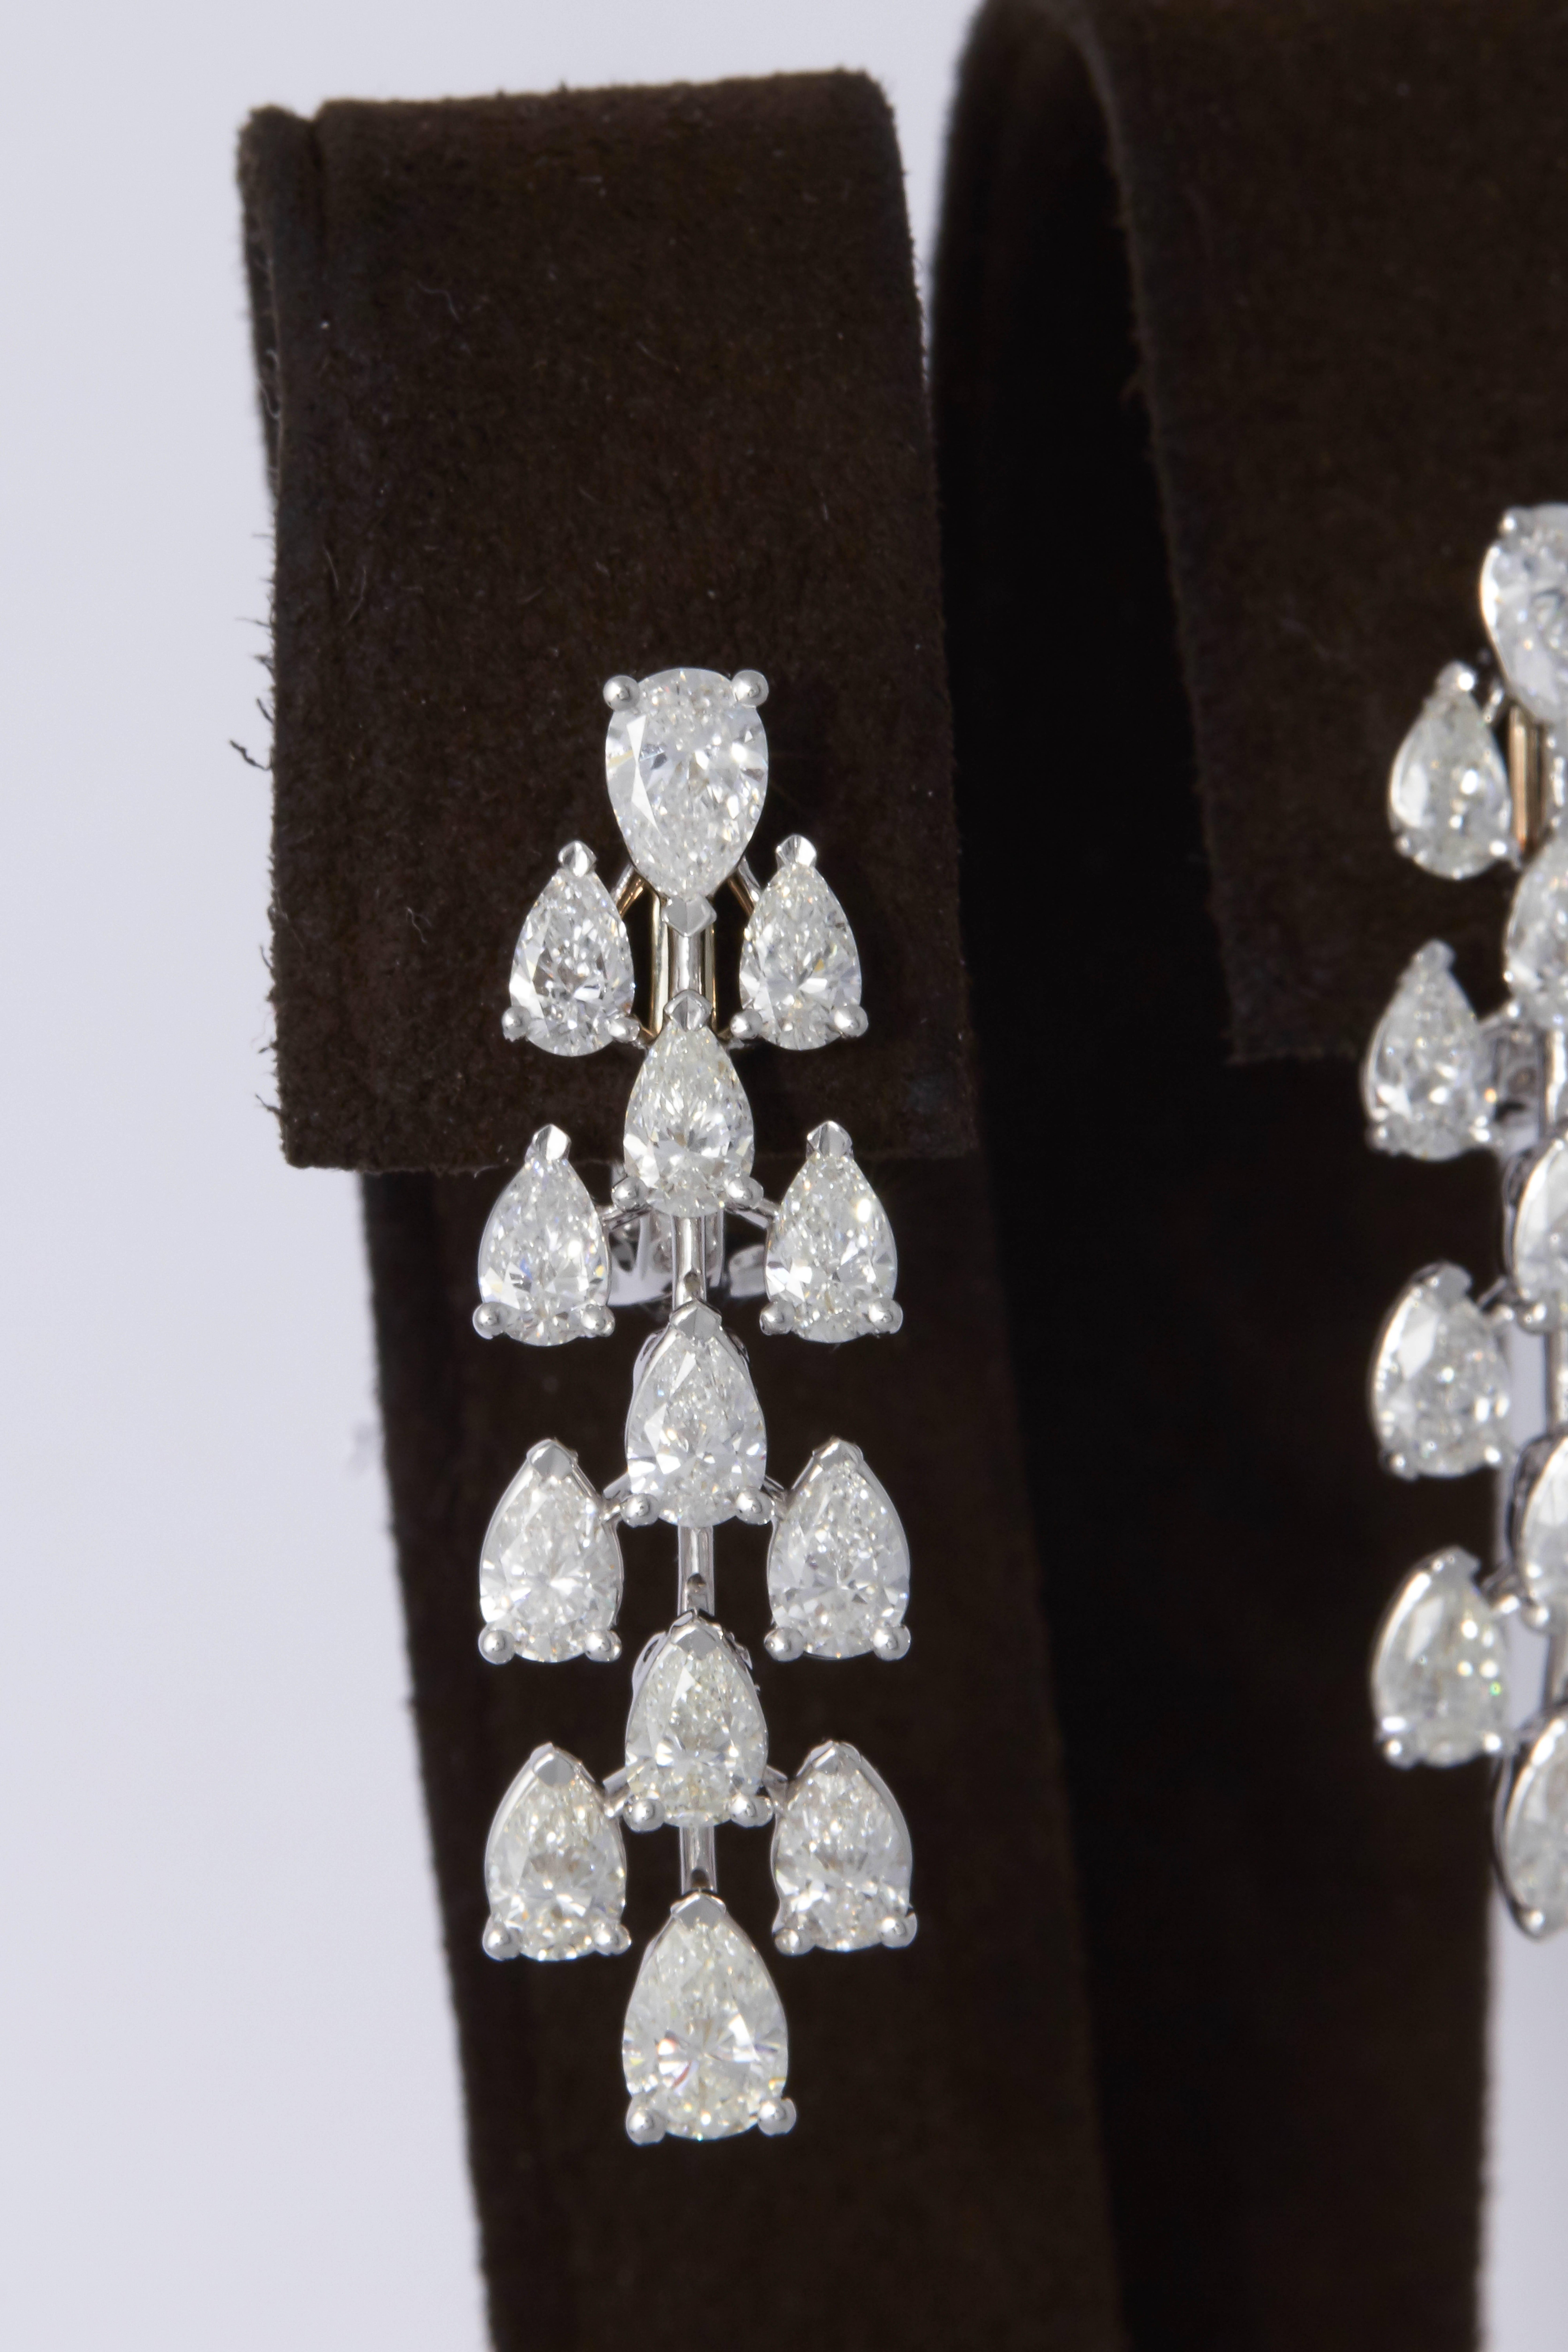 

An elegant pair of diamond dangle earrings. 

5.28 carats of G VS pear shaped diamonds set in 18k white gold.

Approximately 1.35 inches in length. 